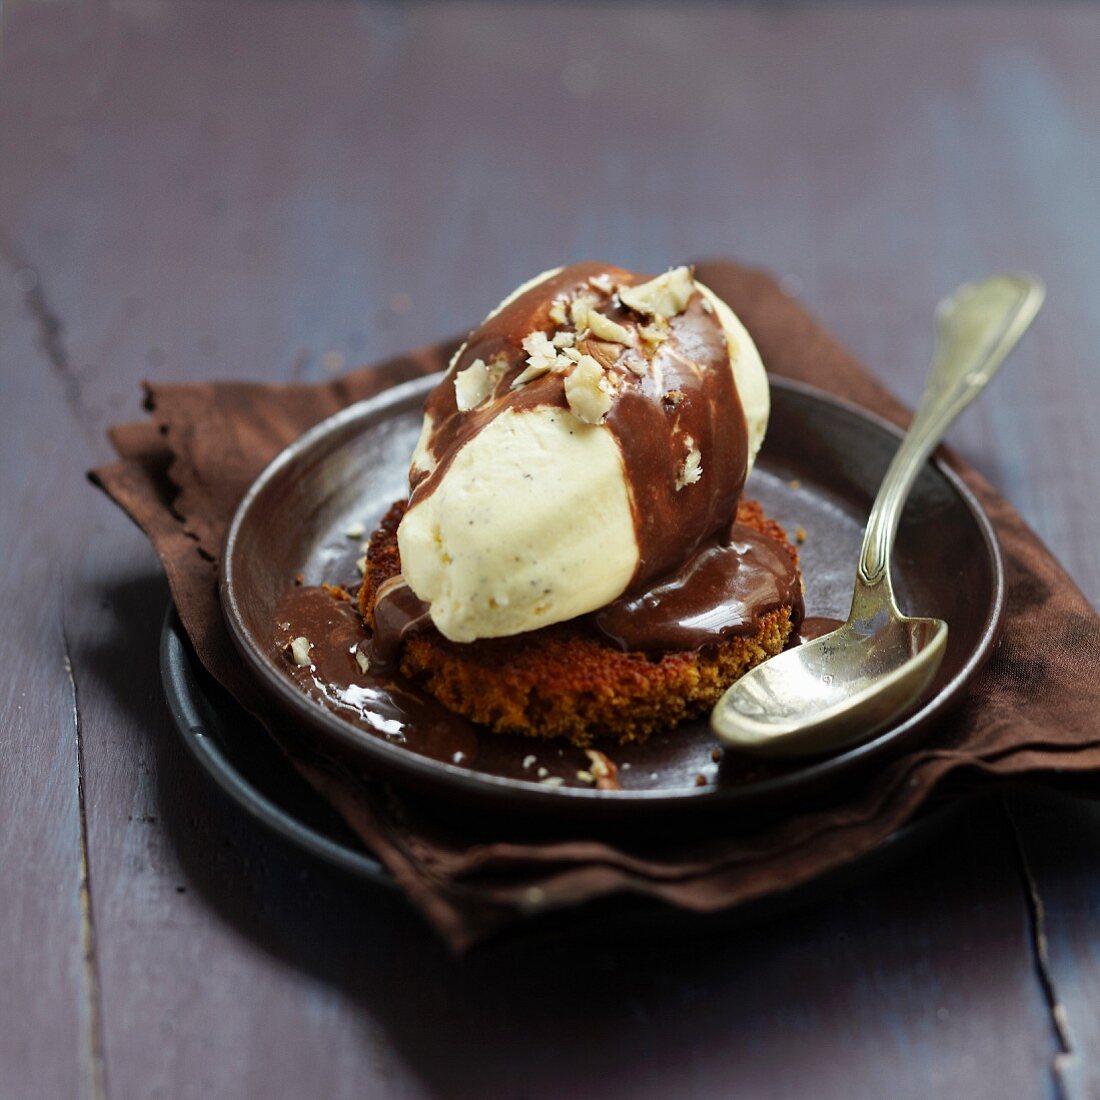 Crisp gingerbread topped with a vanilla ice cream quenelle and chocolate sauce